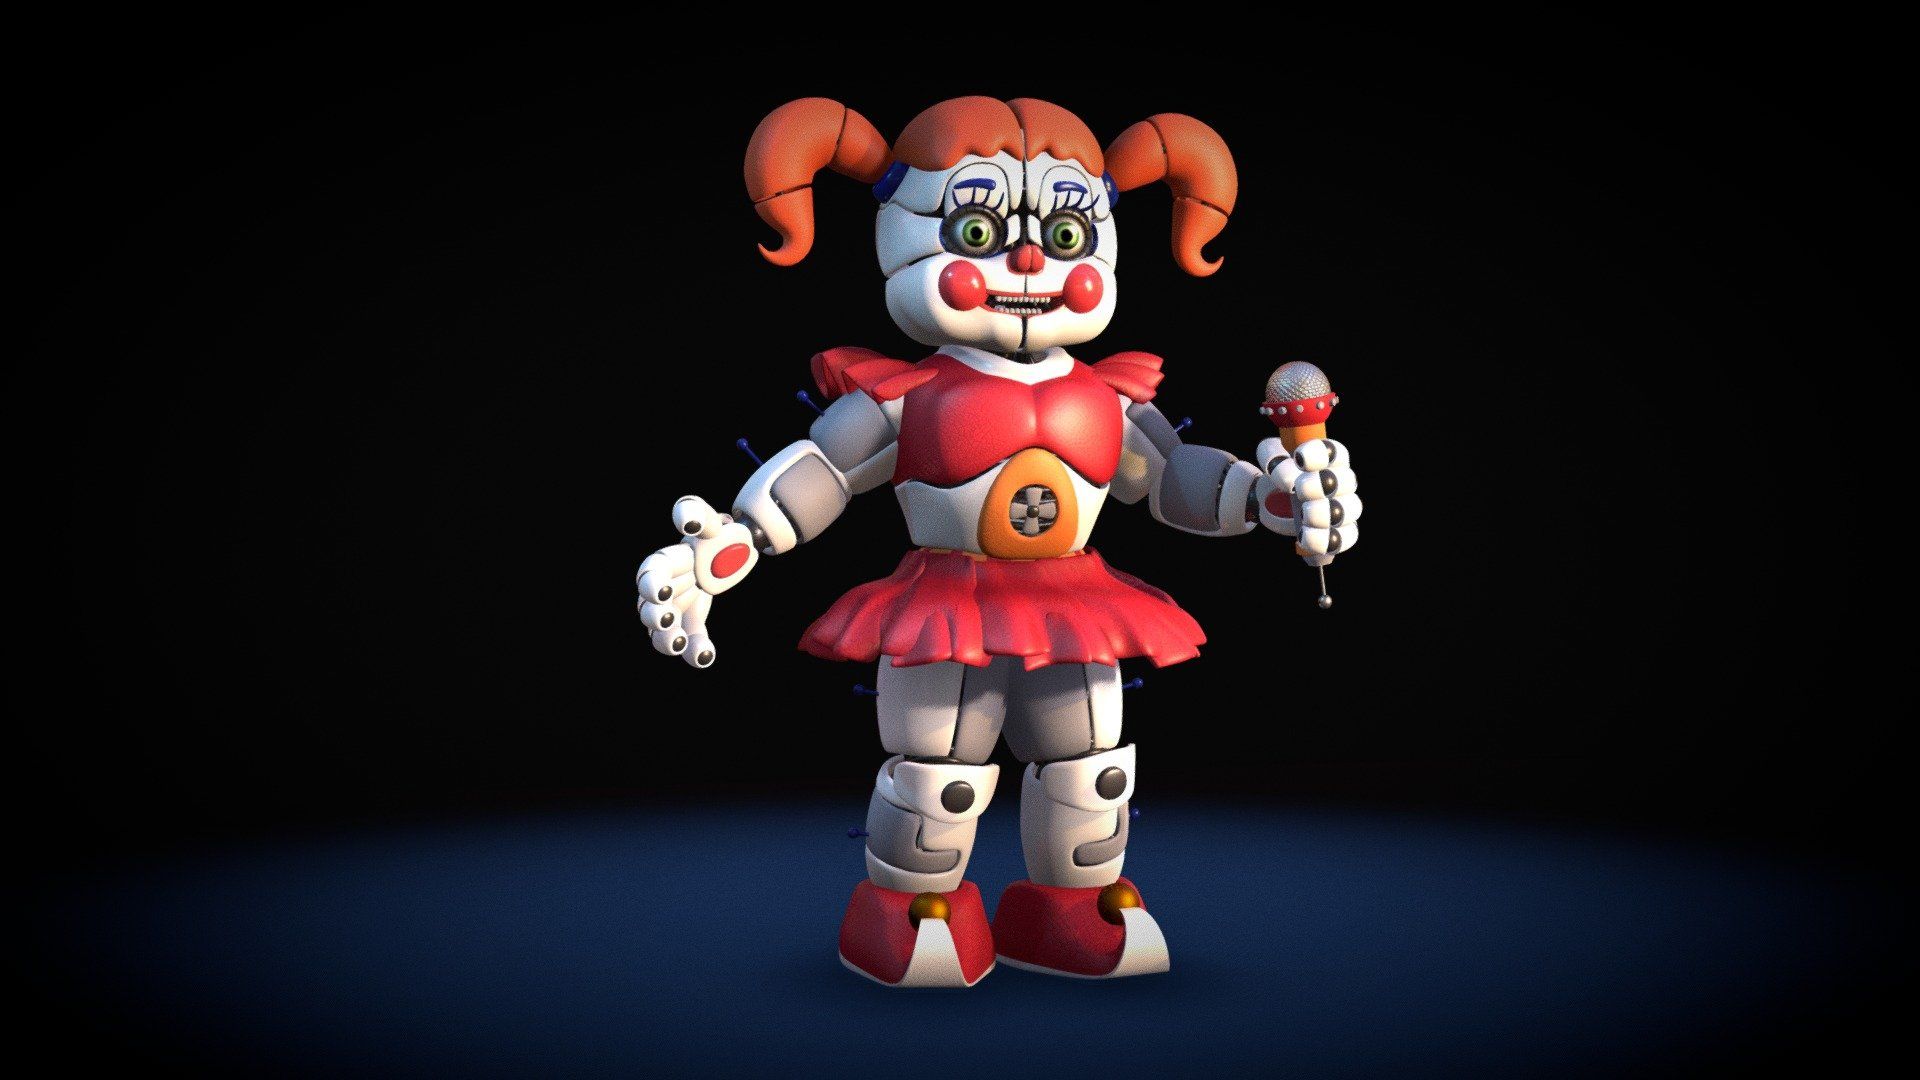 Circus Baby model by Fazersion(Stormoon) [12ee07e]